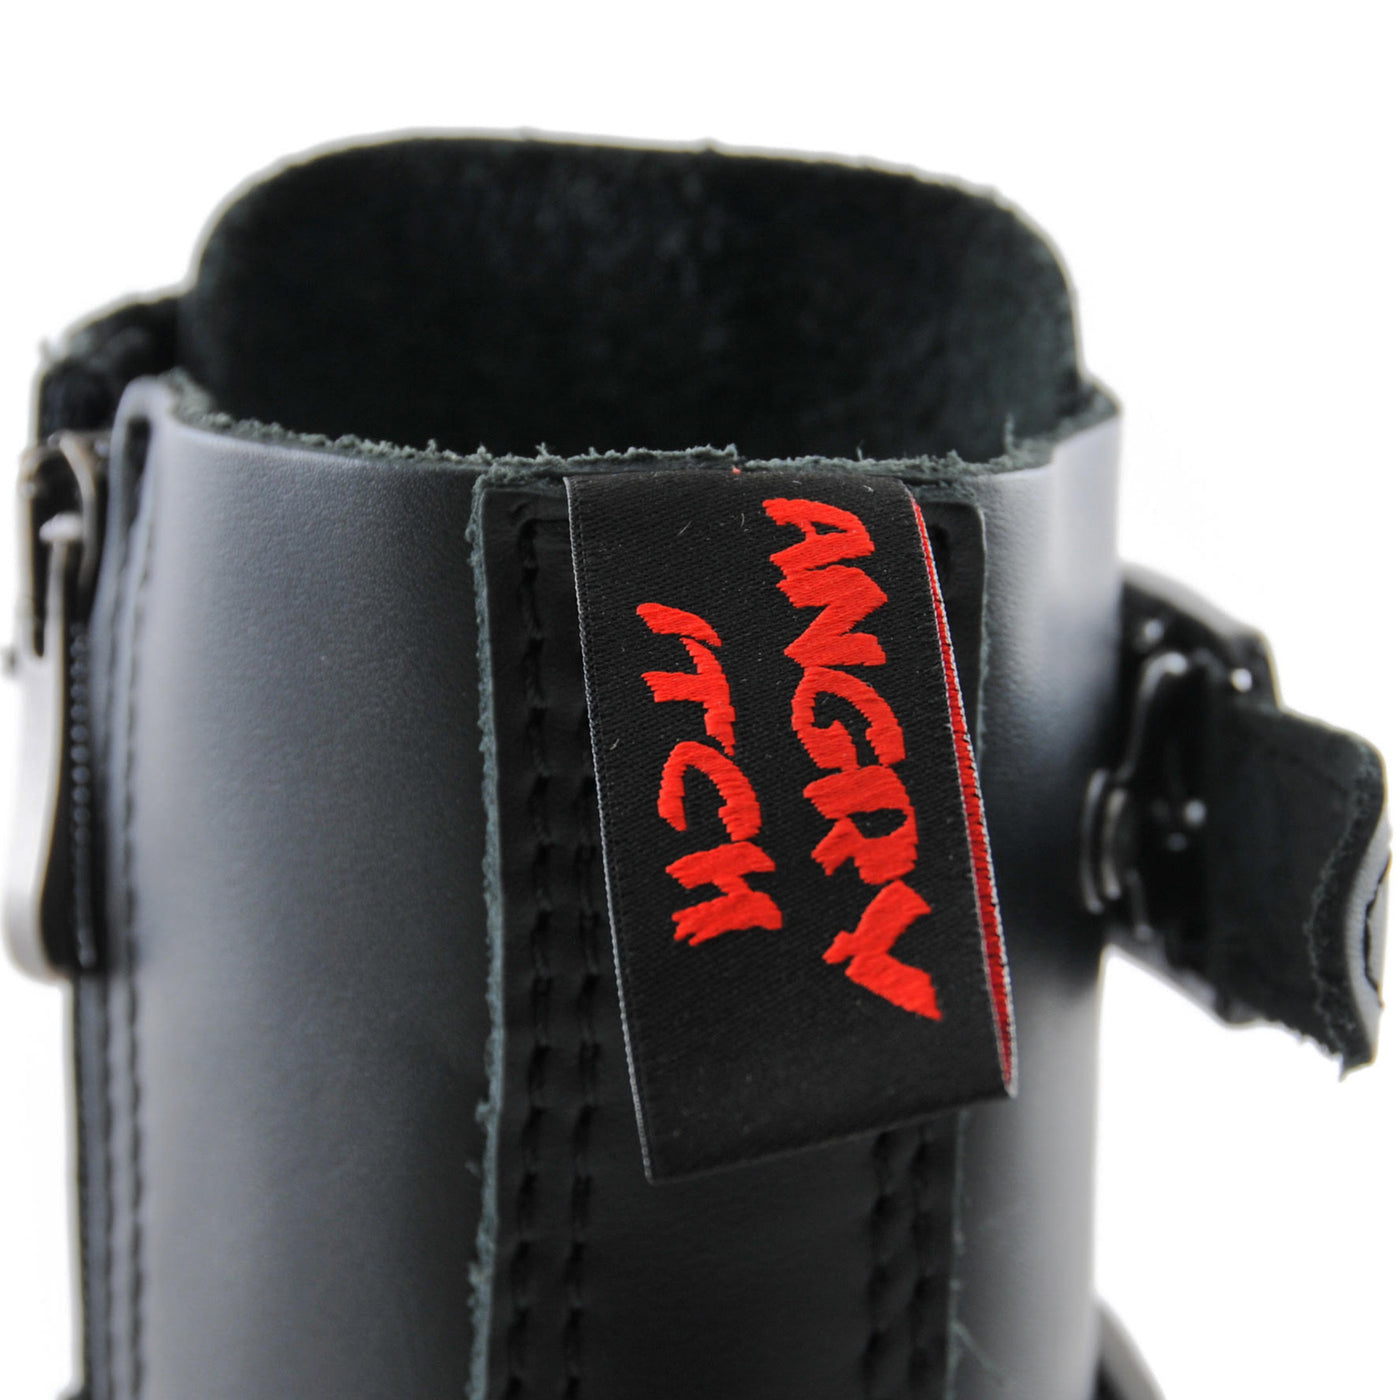 Angry Itch 5 Buckle 14 Hole Combat Ranger Boots with Steel Toe Cap Black Leather